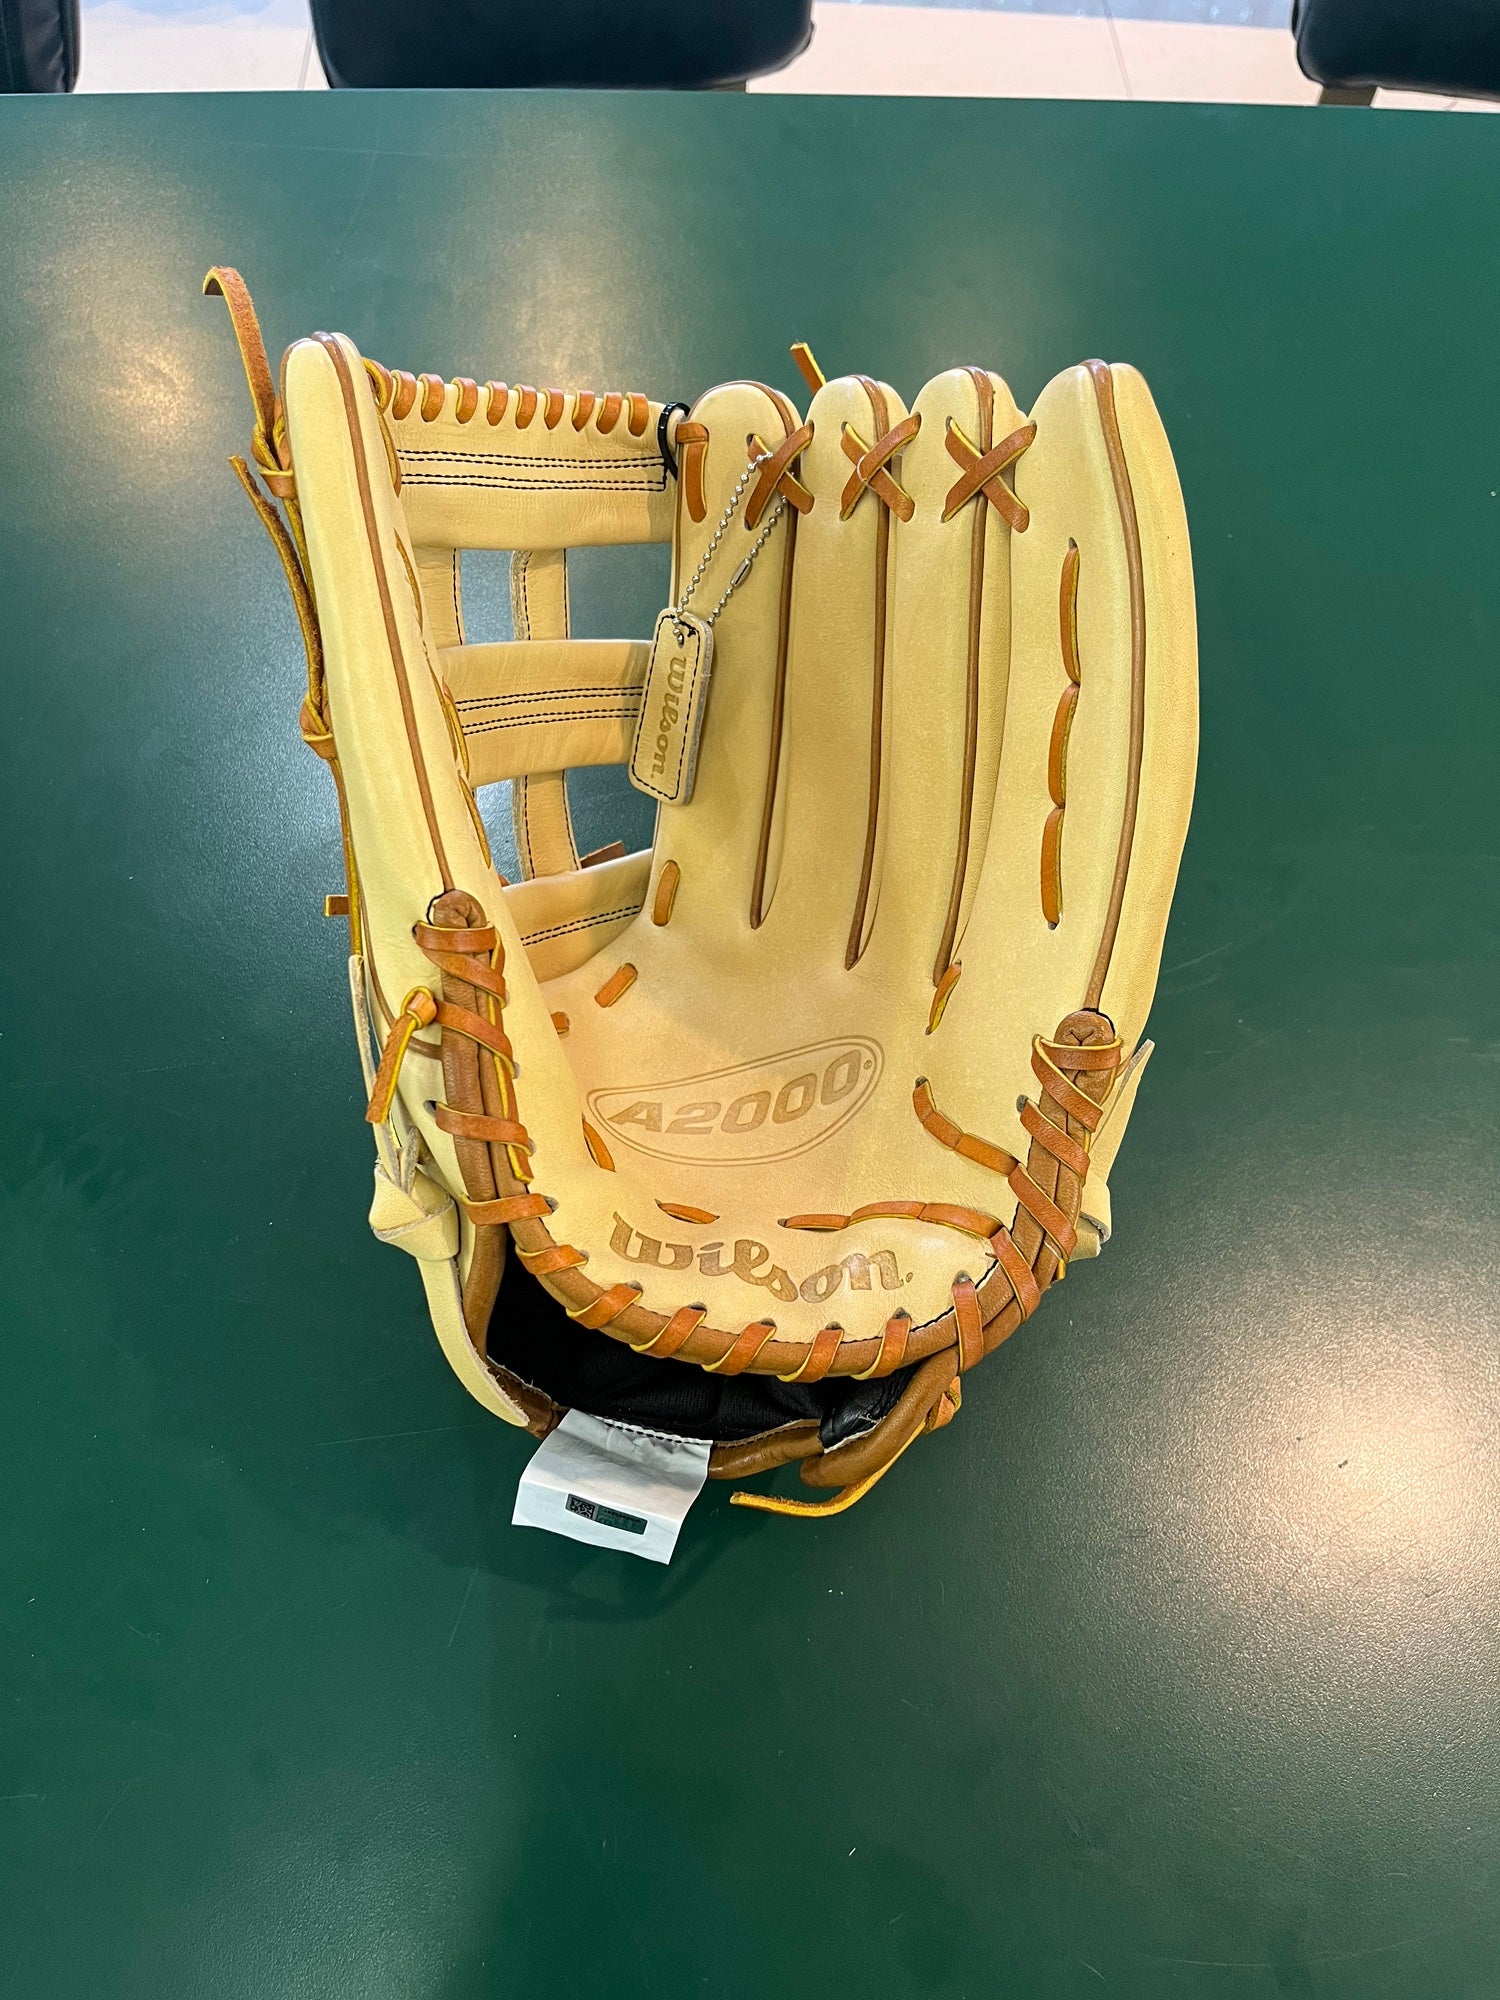 Wilson A2000 Catchers Mitts - The Ultimate Guide [Click to Learn